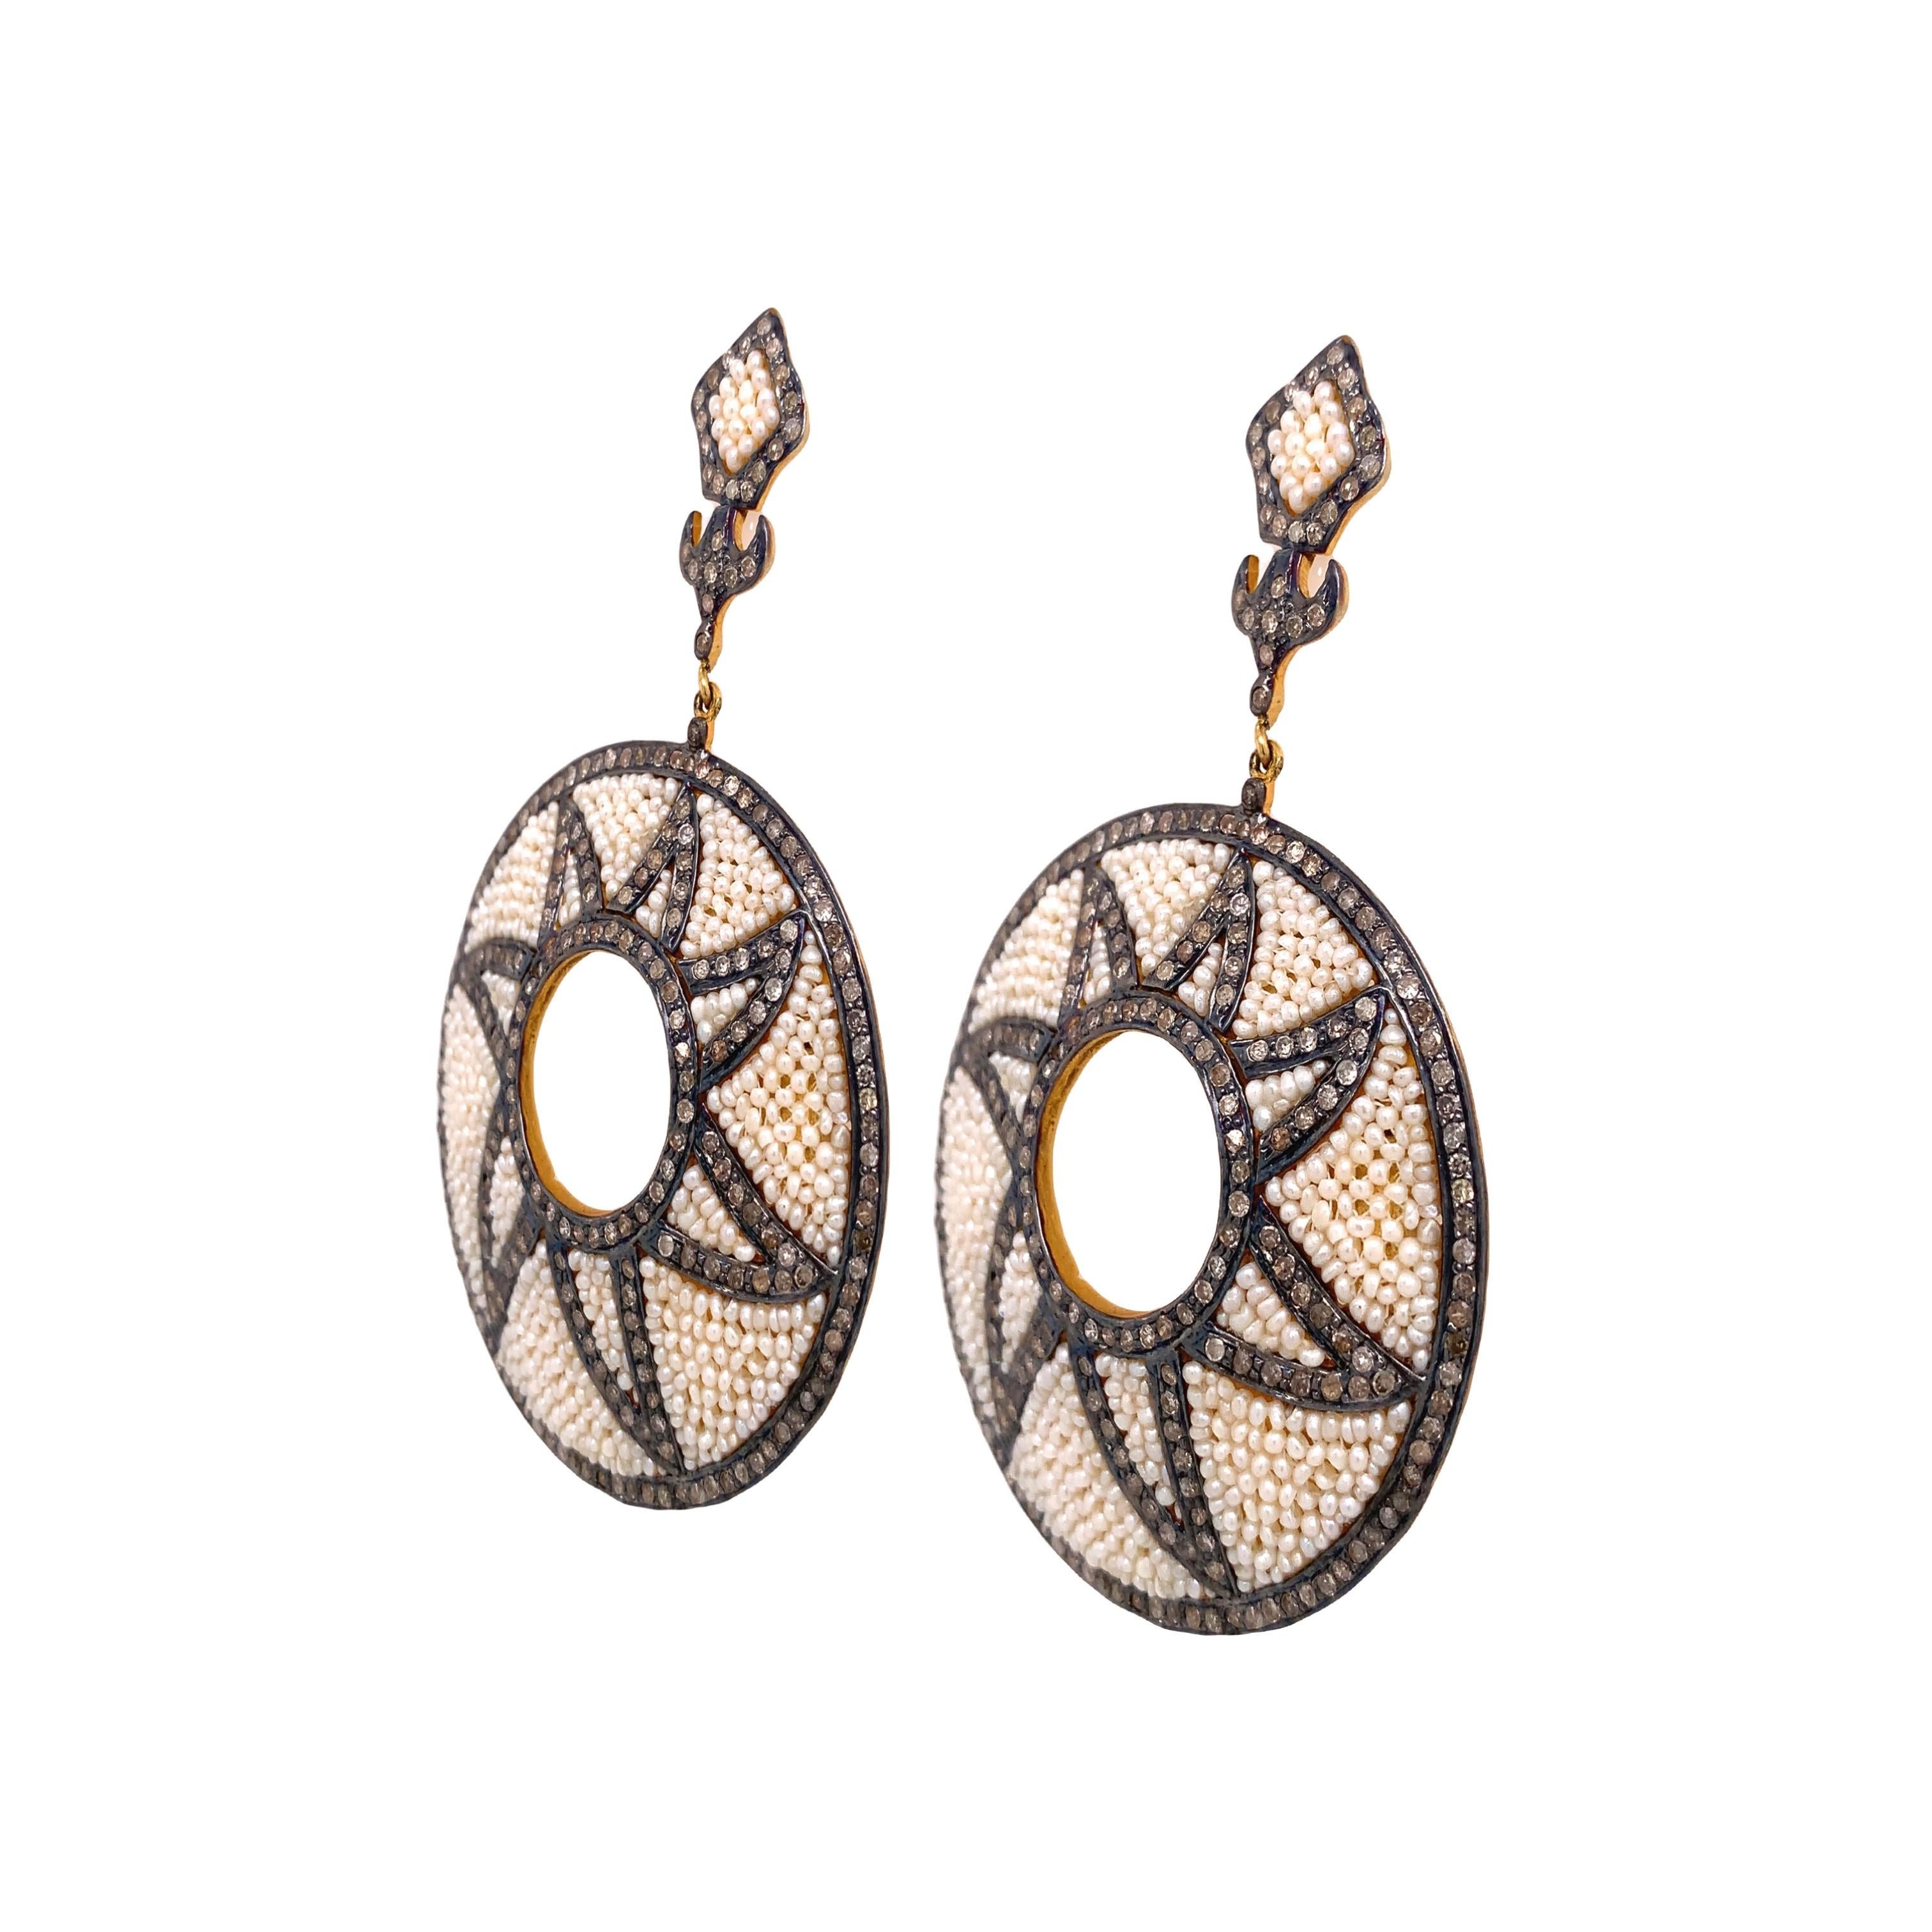 Collection
This pair of earrings is a match made in heaven with its elegant design and its icy diamond and seed pearl combination. The earrings are made with a 14K yellow gold plated Sterling Silver setting with a disc-shaped design.

Diamond: